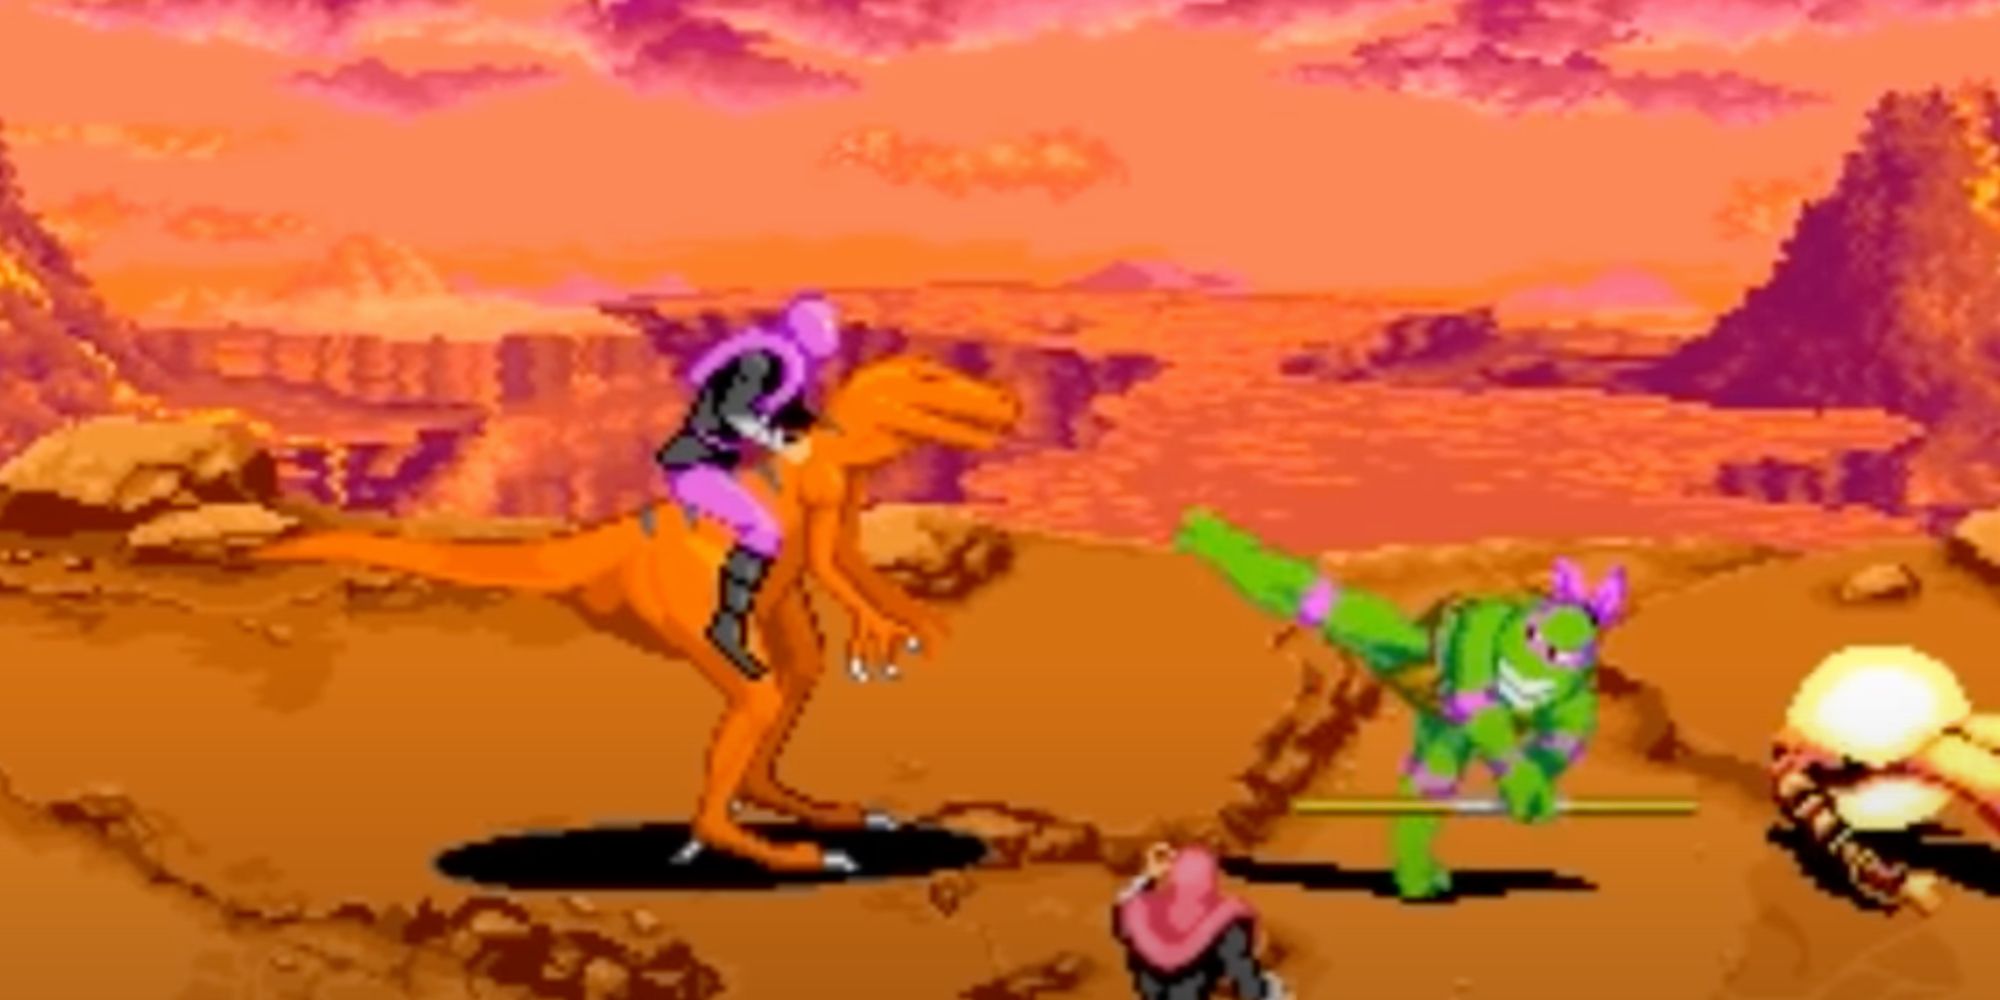 Donatello kicks at a foot soldier who is riding a raptor.